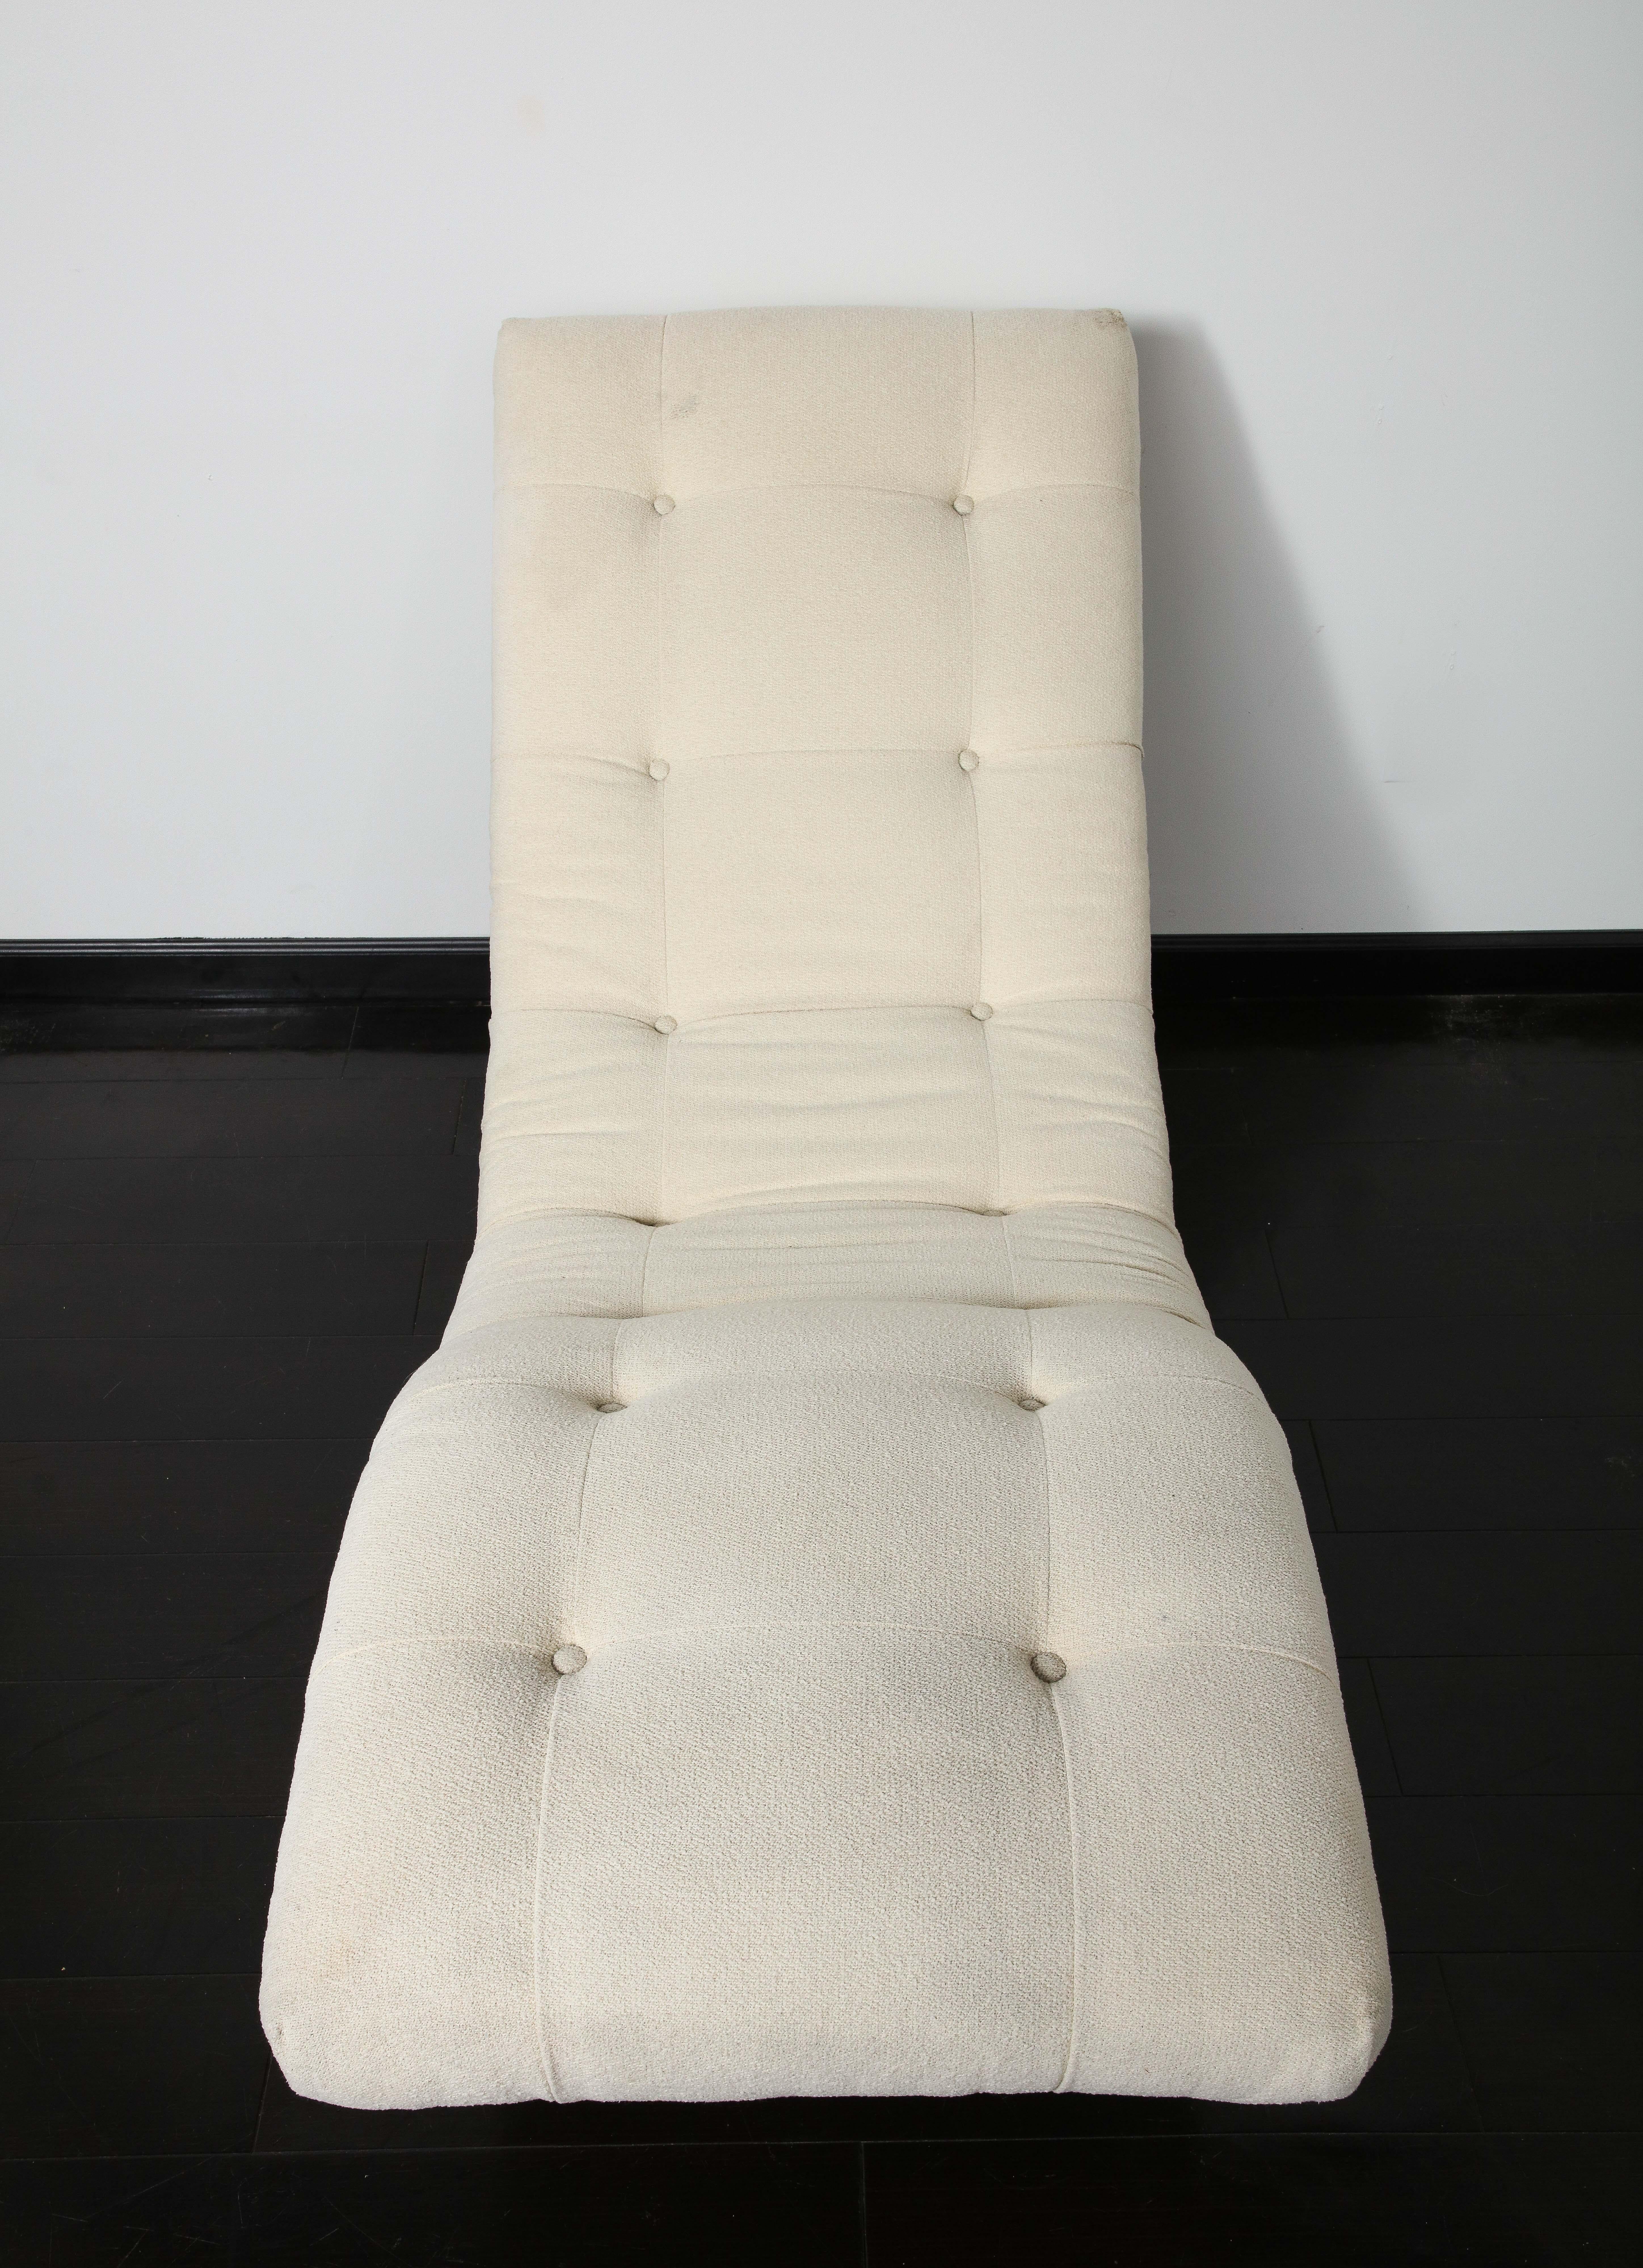 Milo Baughman Wave Chaise Lounge Chair with Tufted Top and Brass Base, 1970s For Sale 8